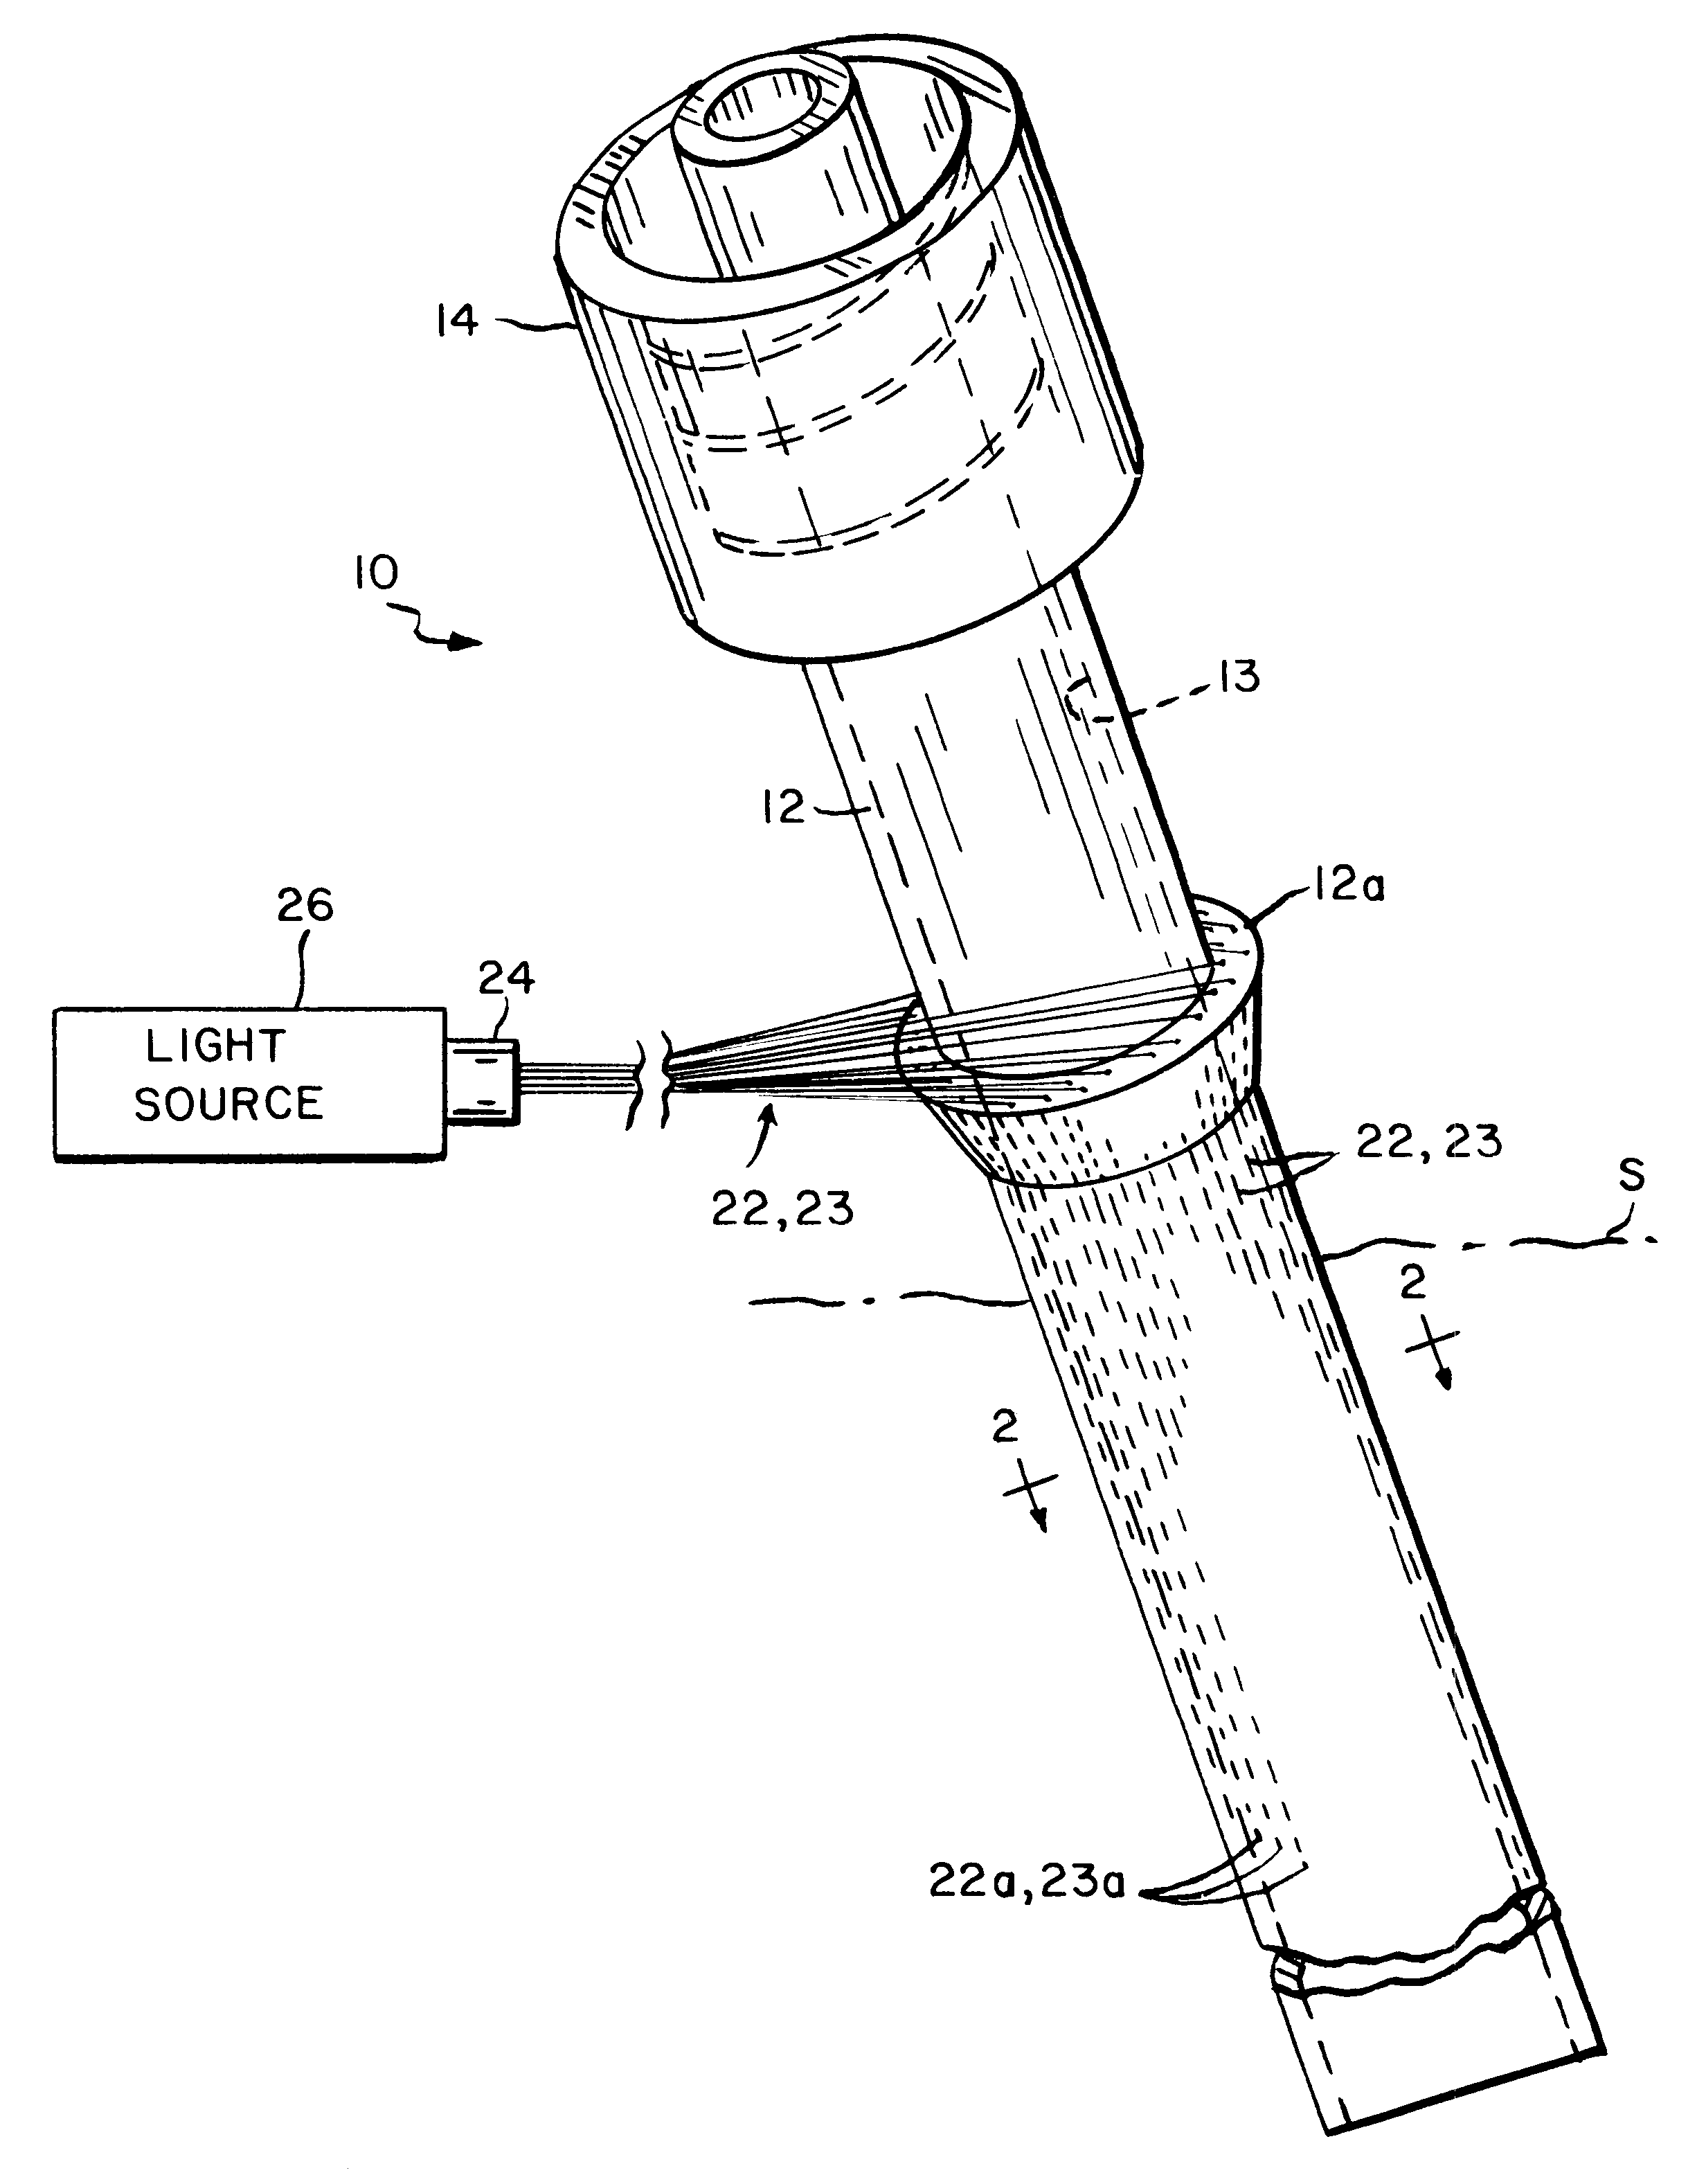 Method and apparatus to prevent infections